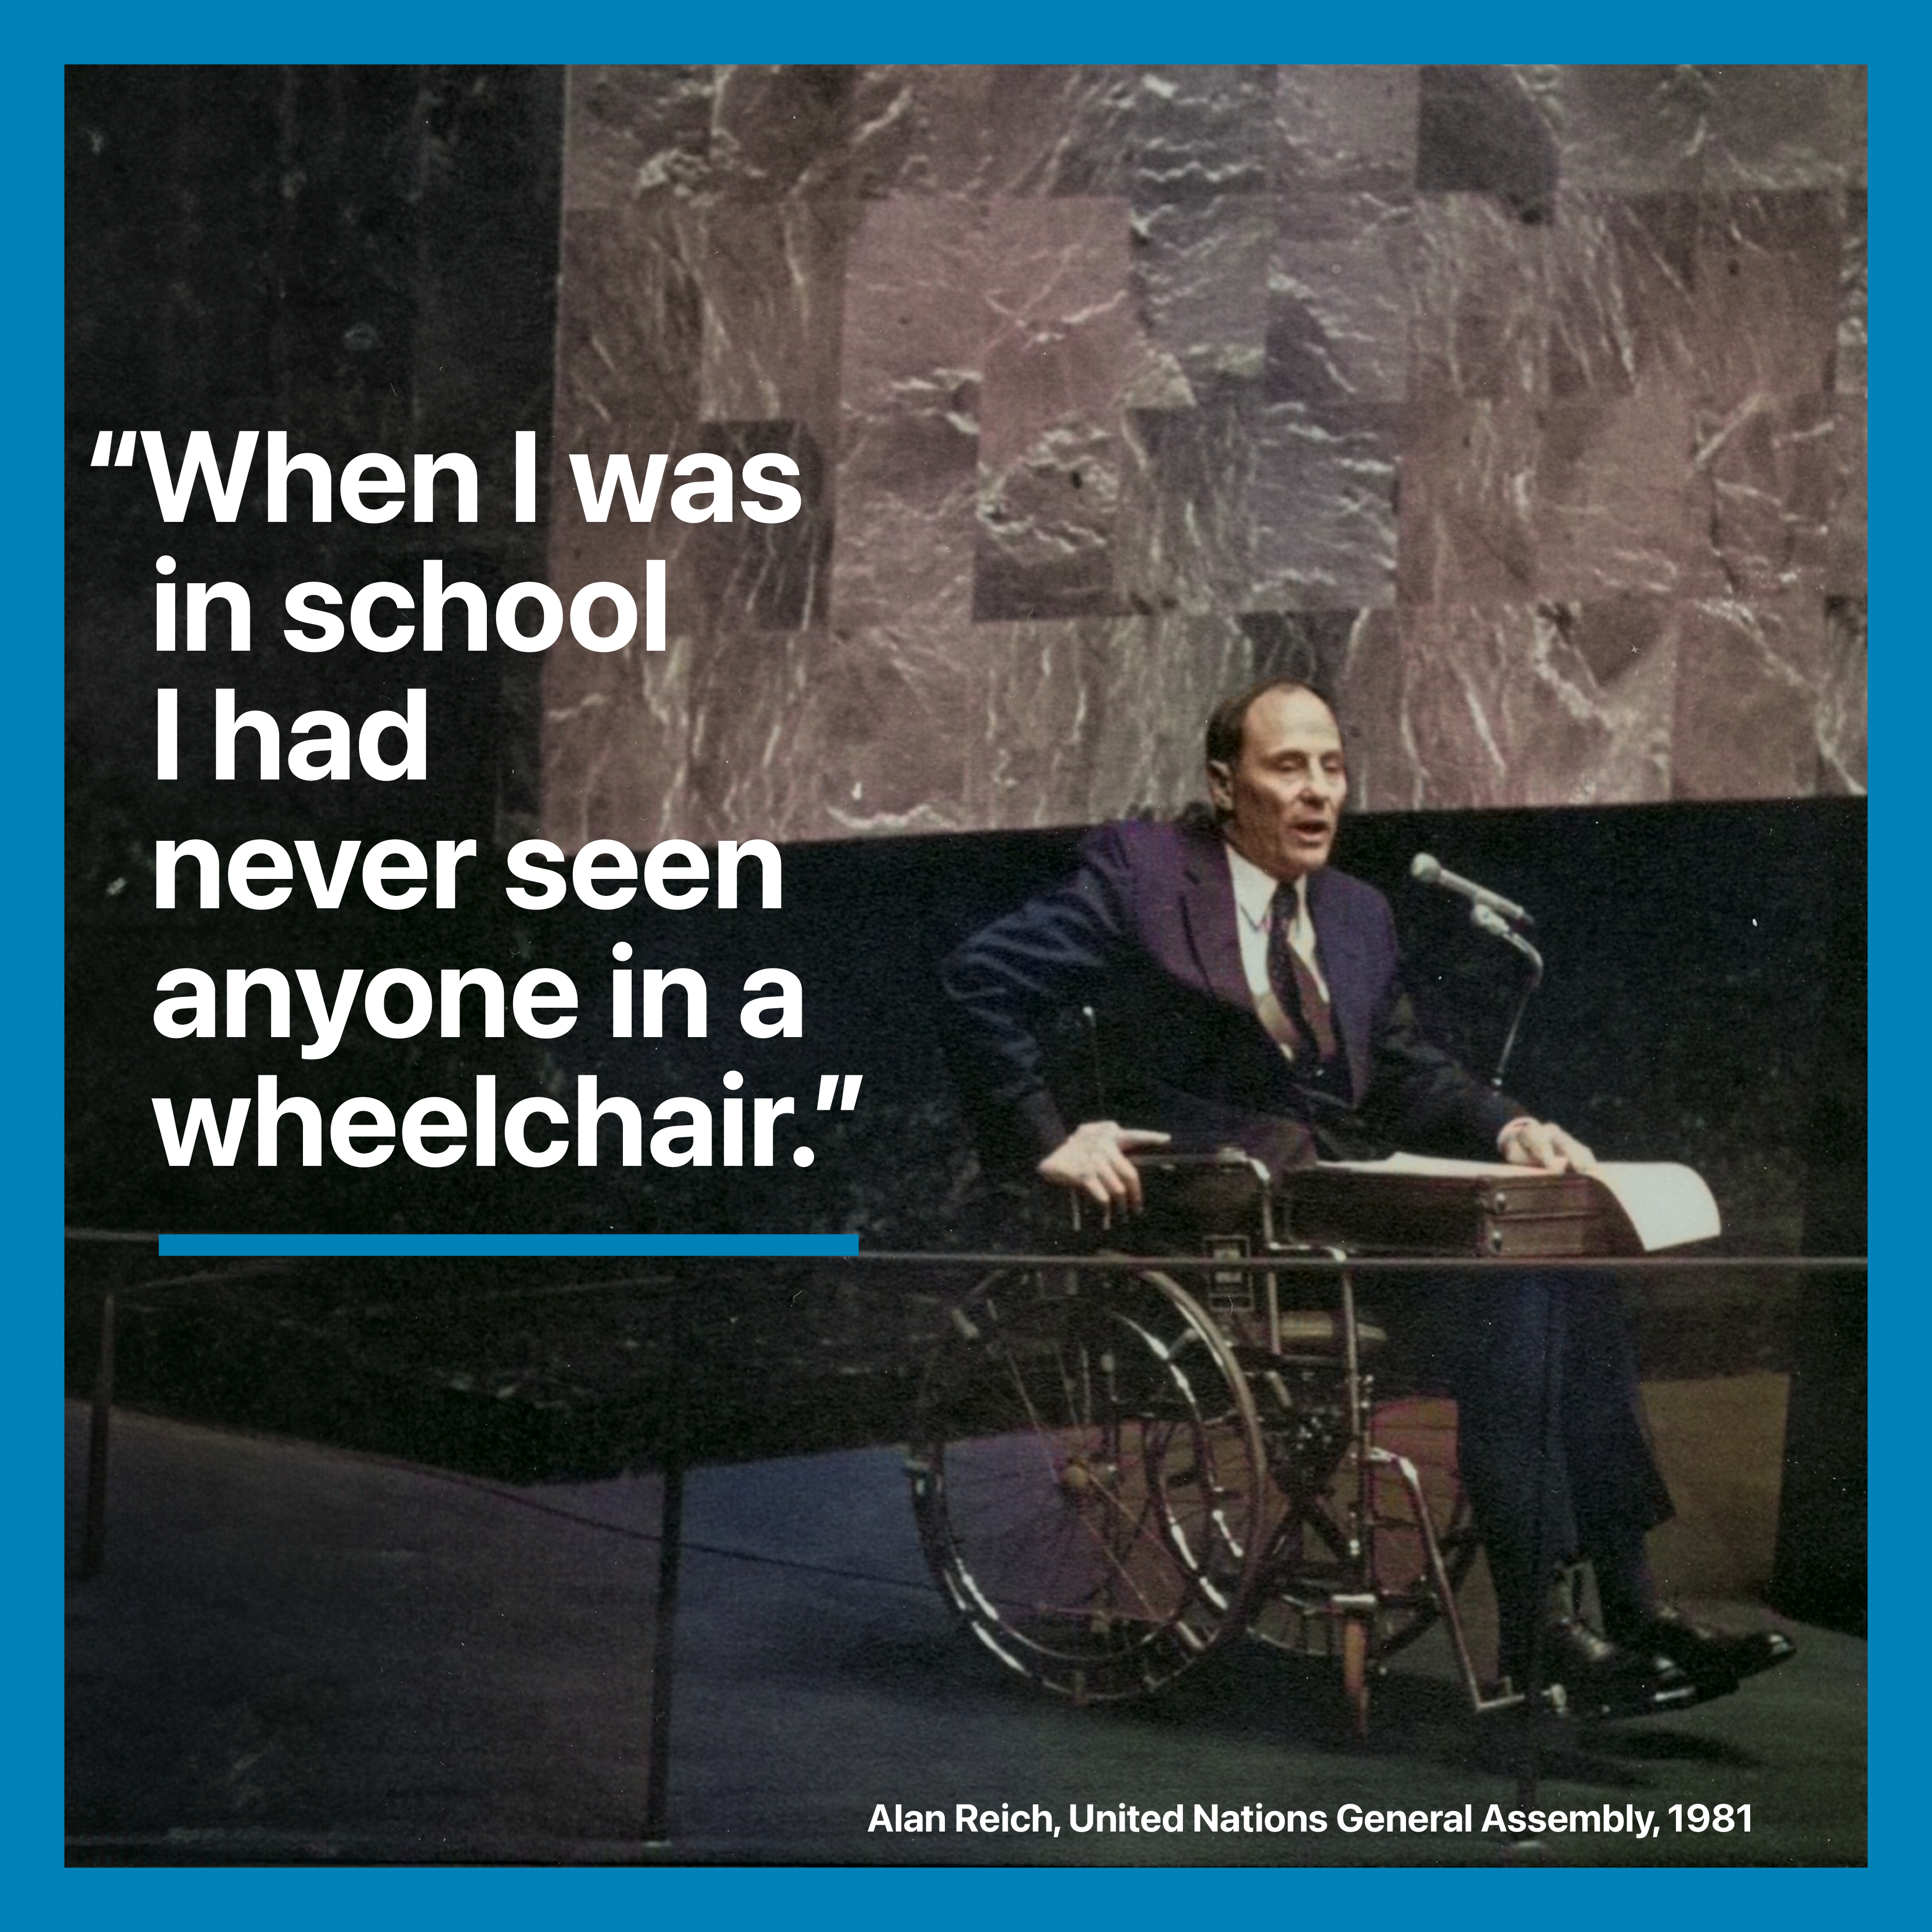 Text reads "when I was in school I had never seen anyone in a wheelchair." Alan Reich speaking at the podium in front of the UN General Assembly